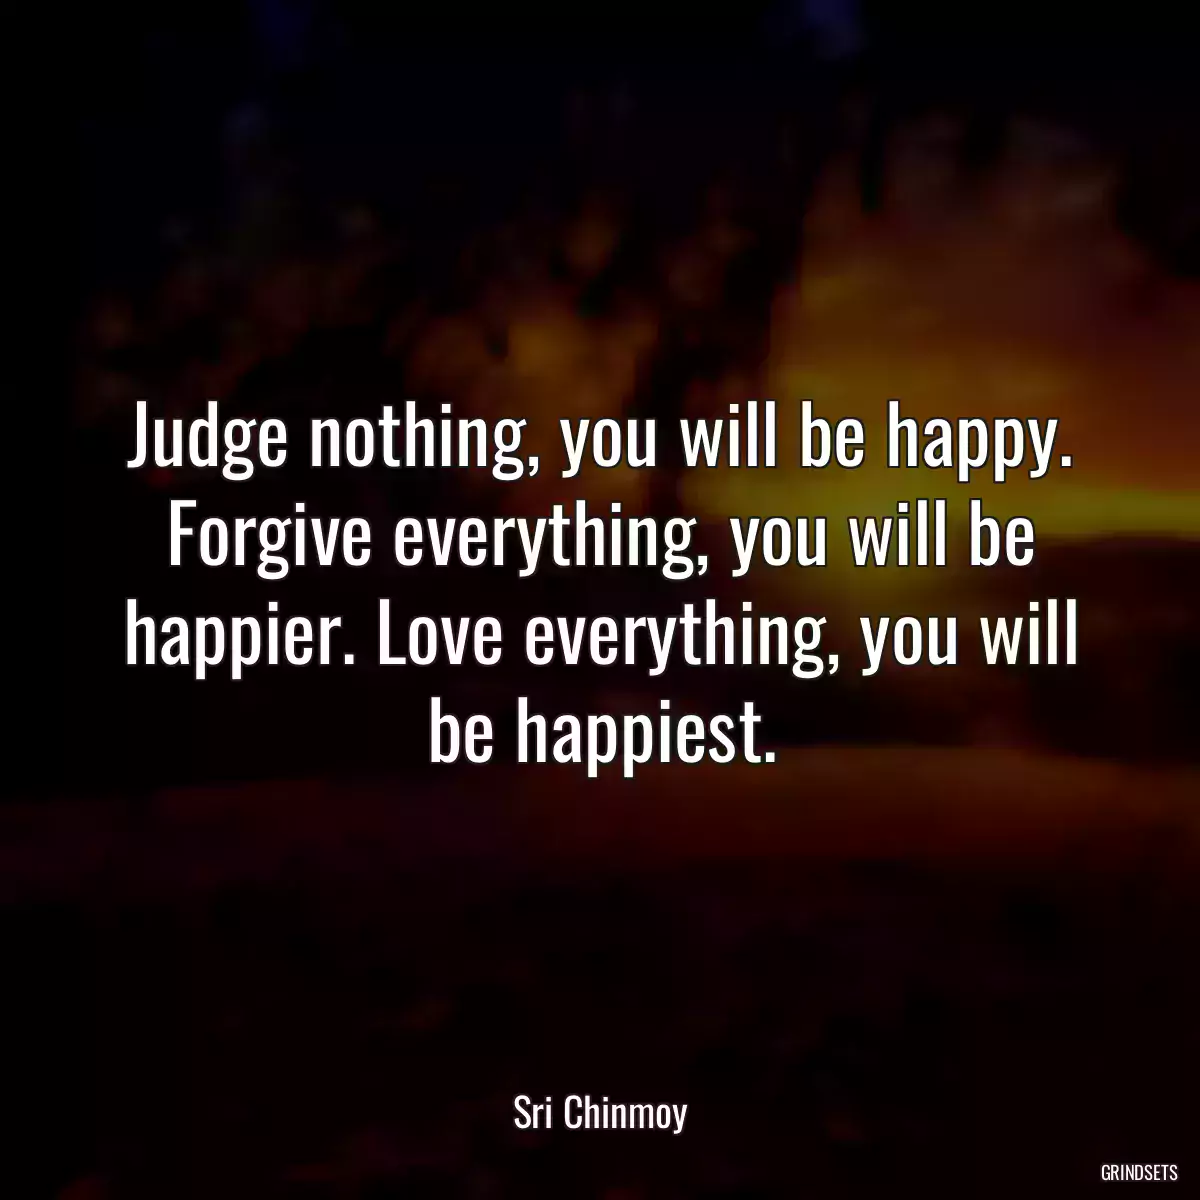 Judge nothing, you will be happy. Forgive everything, you will be happier. Love everything, you will be happiest.